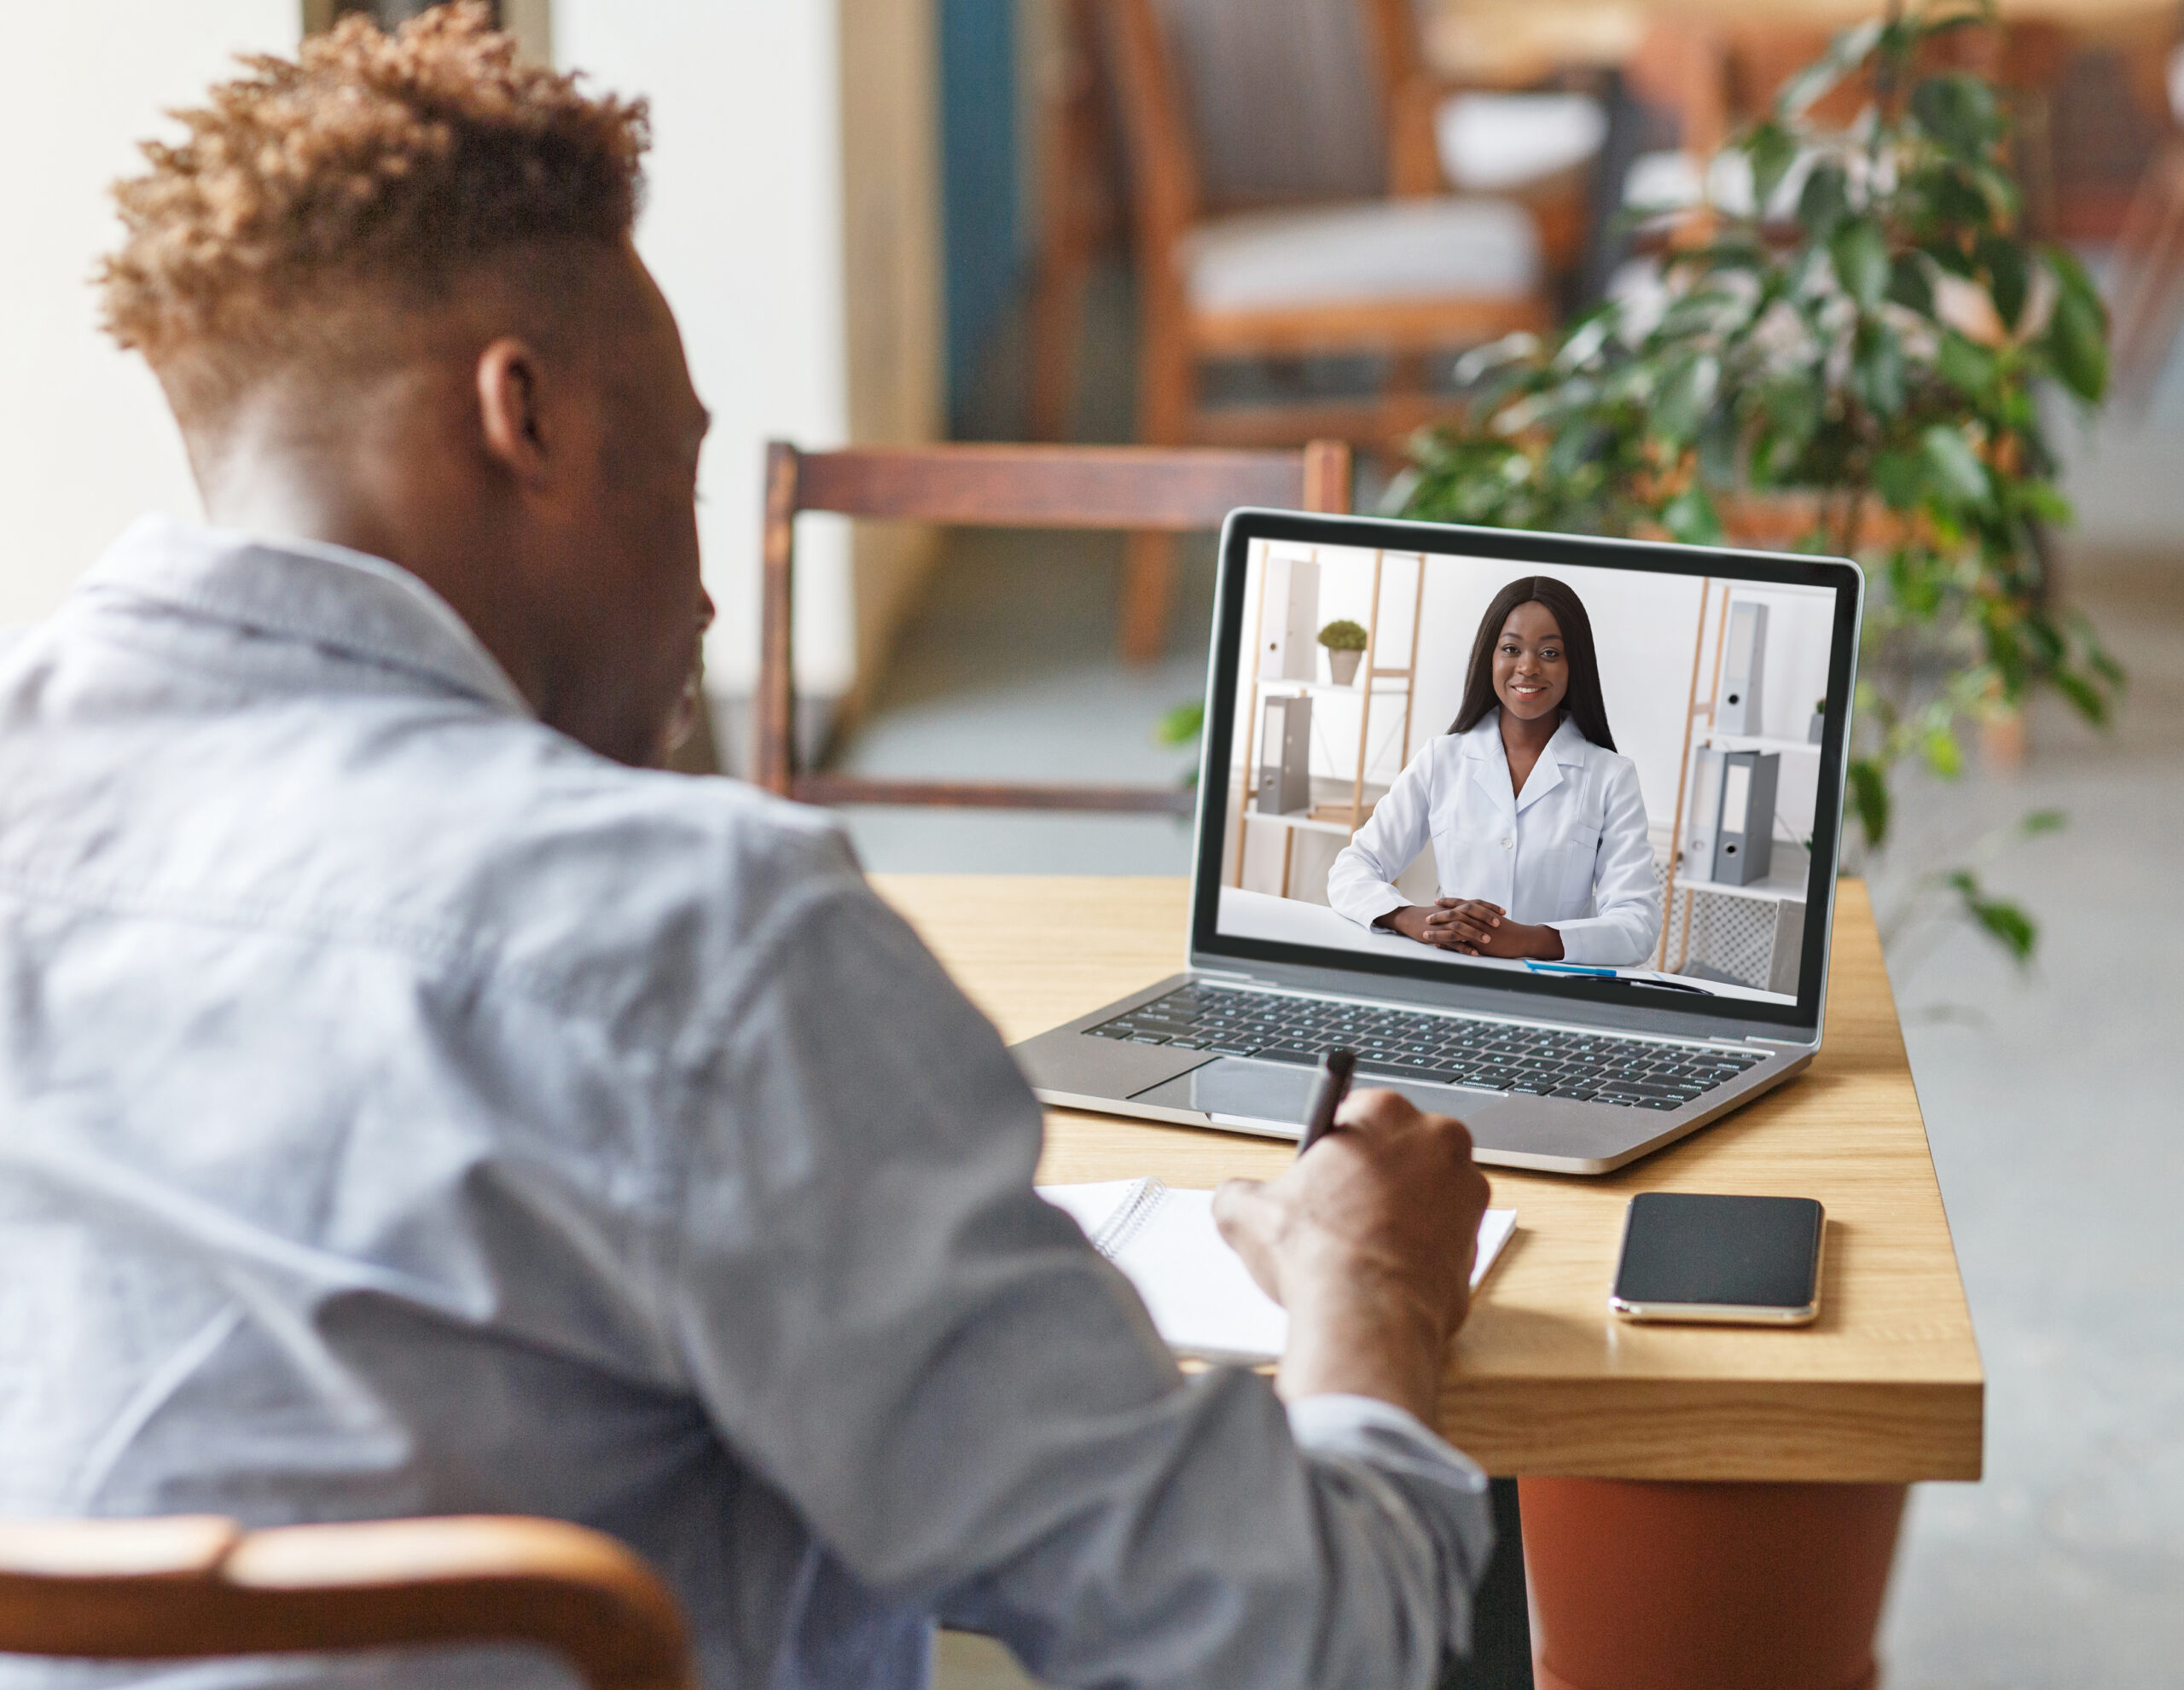 Student in telehealth appointment on computer - doctor appears on screen